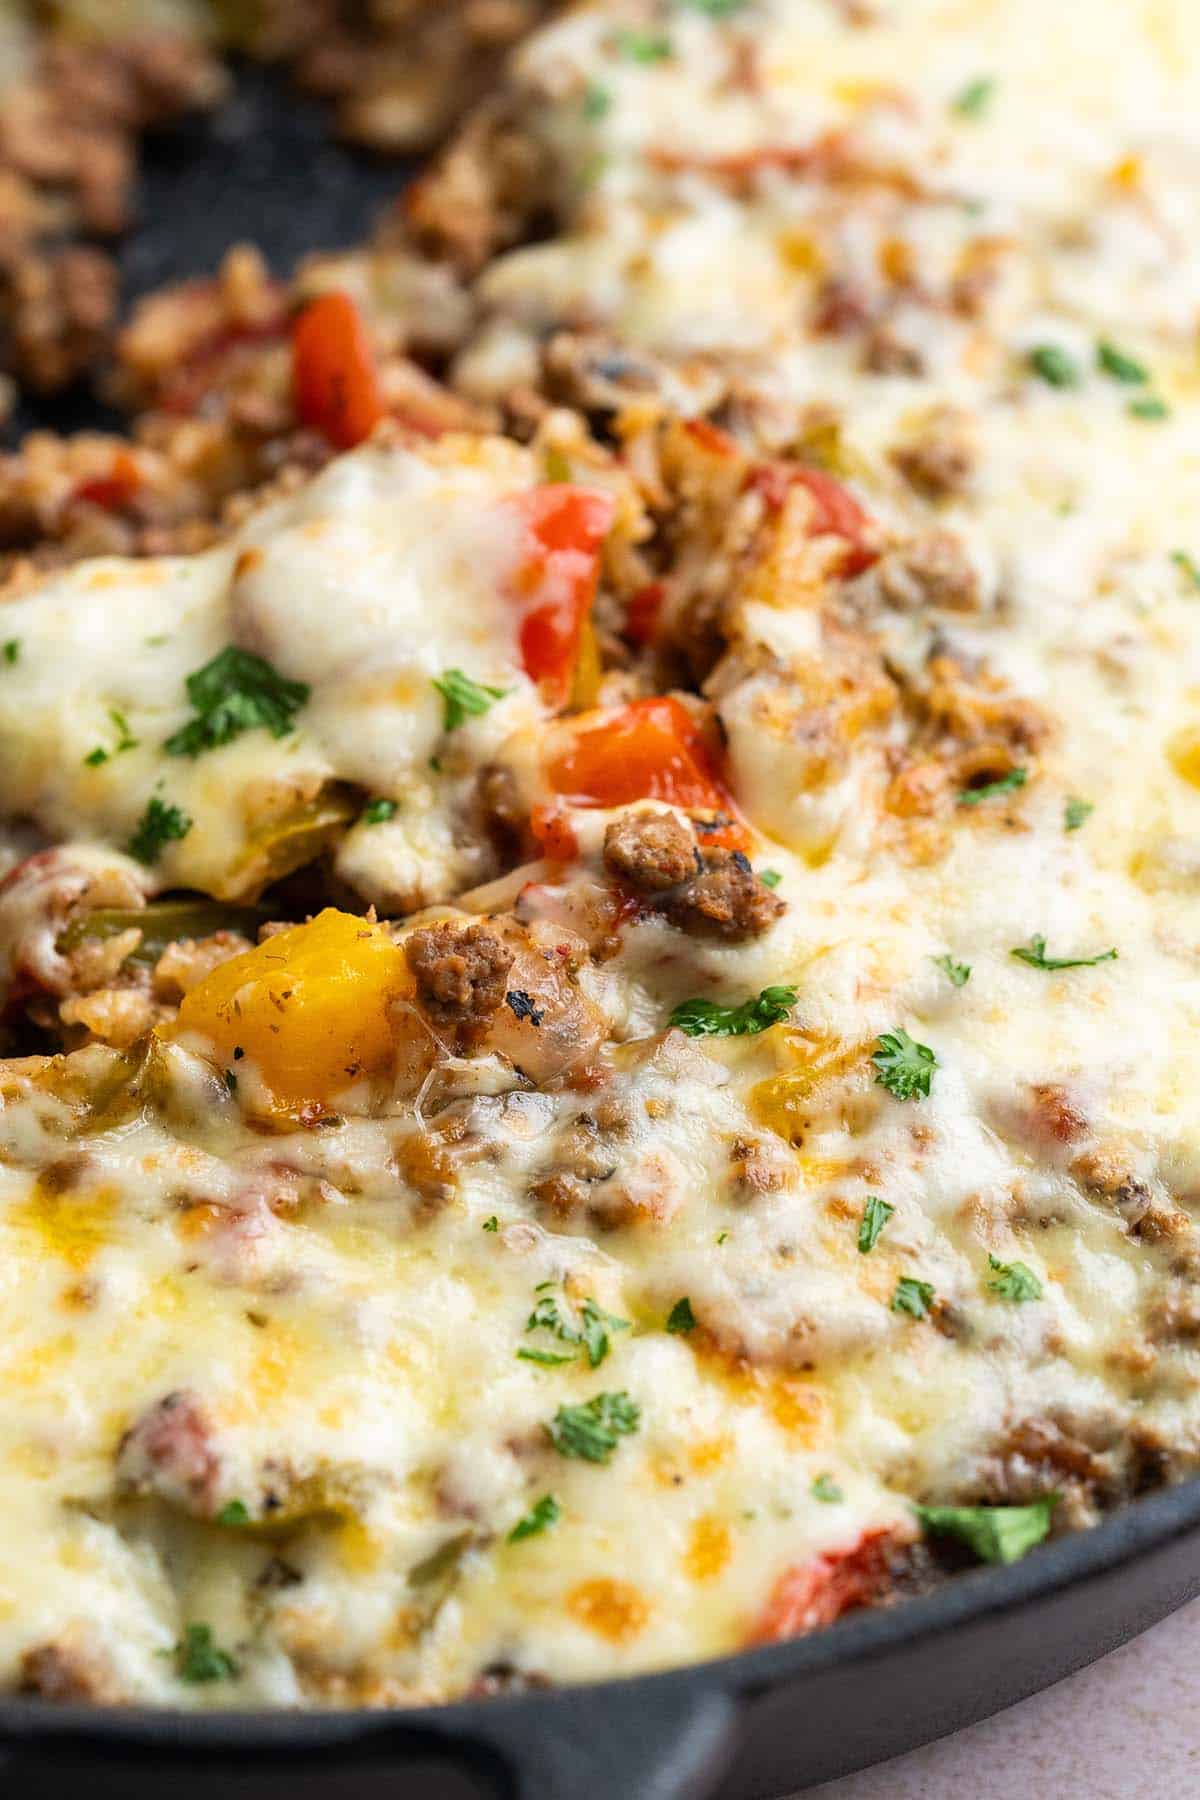 close up view of stuffed pepper casserole in skillet showing ground beef and cheese